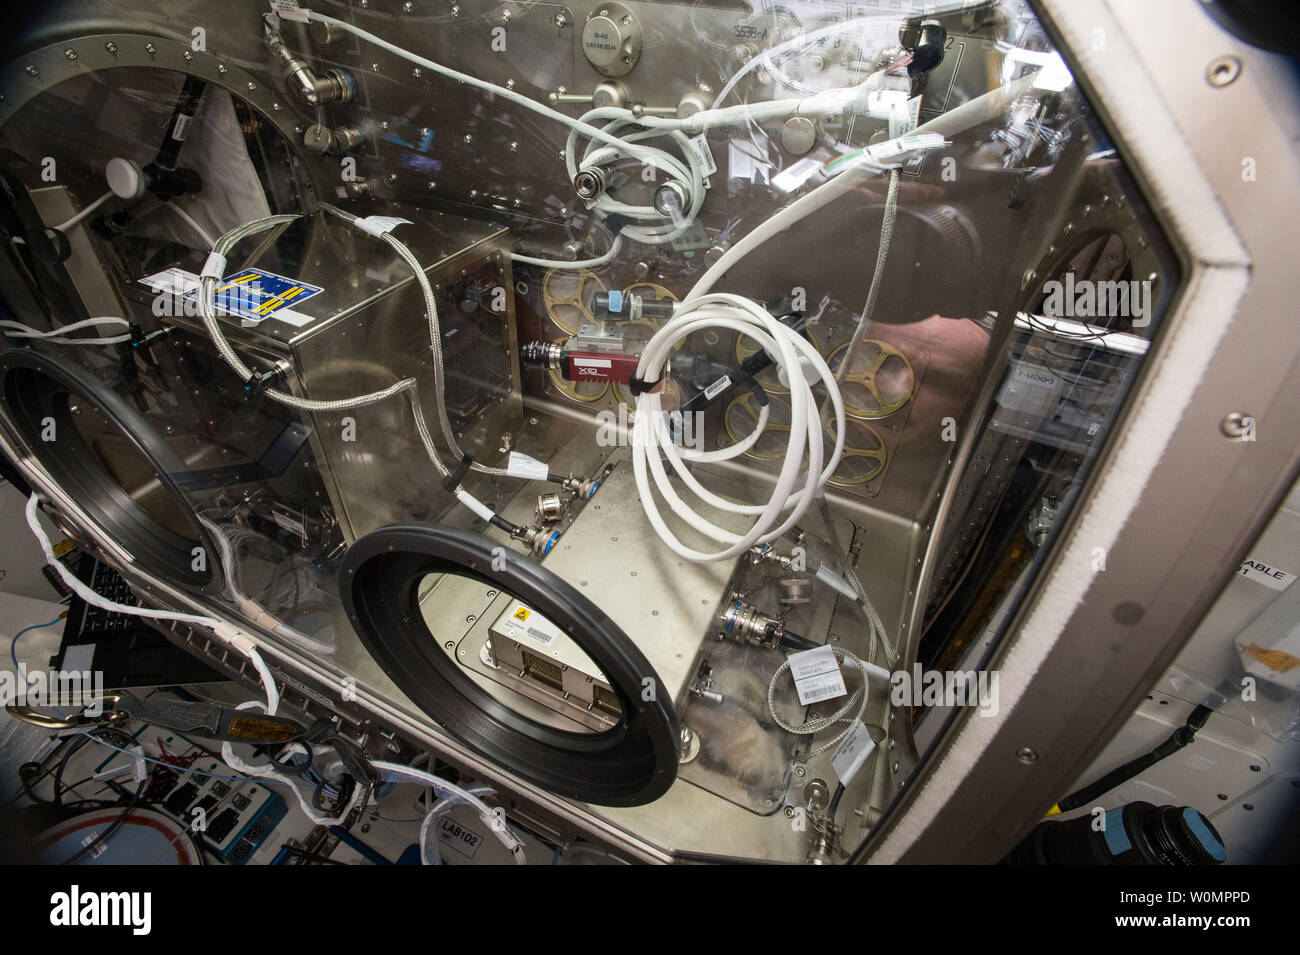 Crew members on the International Space Station re-installed the first 3D printer in orbit, during the week of June 27, 2016, to continue research on the developing technology and how it can be used in space. NASA astronaut Jeff Williams installed the printer in the Microgravity Science Glovebox to begin another round of sample builds for NASA's 3D Printing in Zero-G Technology Demonstration. The 3D printer, originally delivered to the station and tested in 2014, heats a relatively low-temperature plastic filament to build parts layer by layer using designs supplied to the machine. NASA/UPI Stock Photo